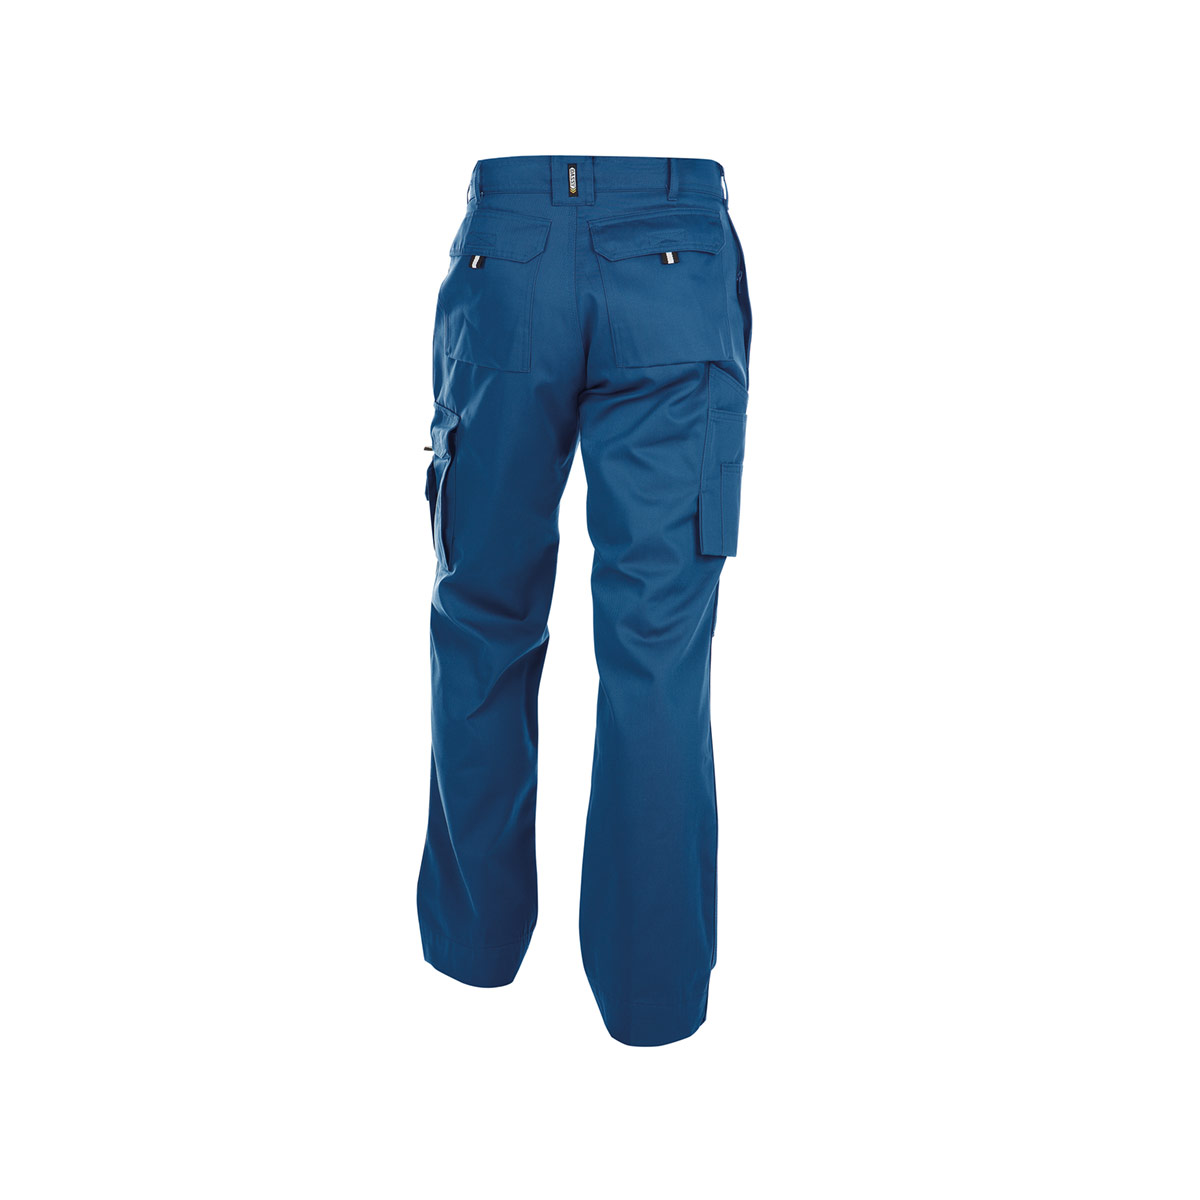 DASSY Miami work trousers with knee pad pockets